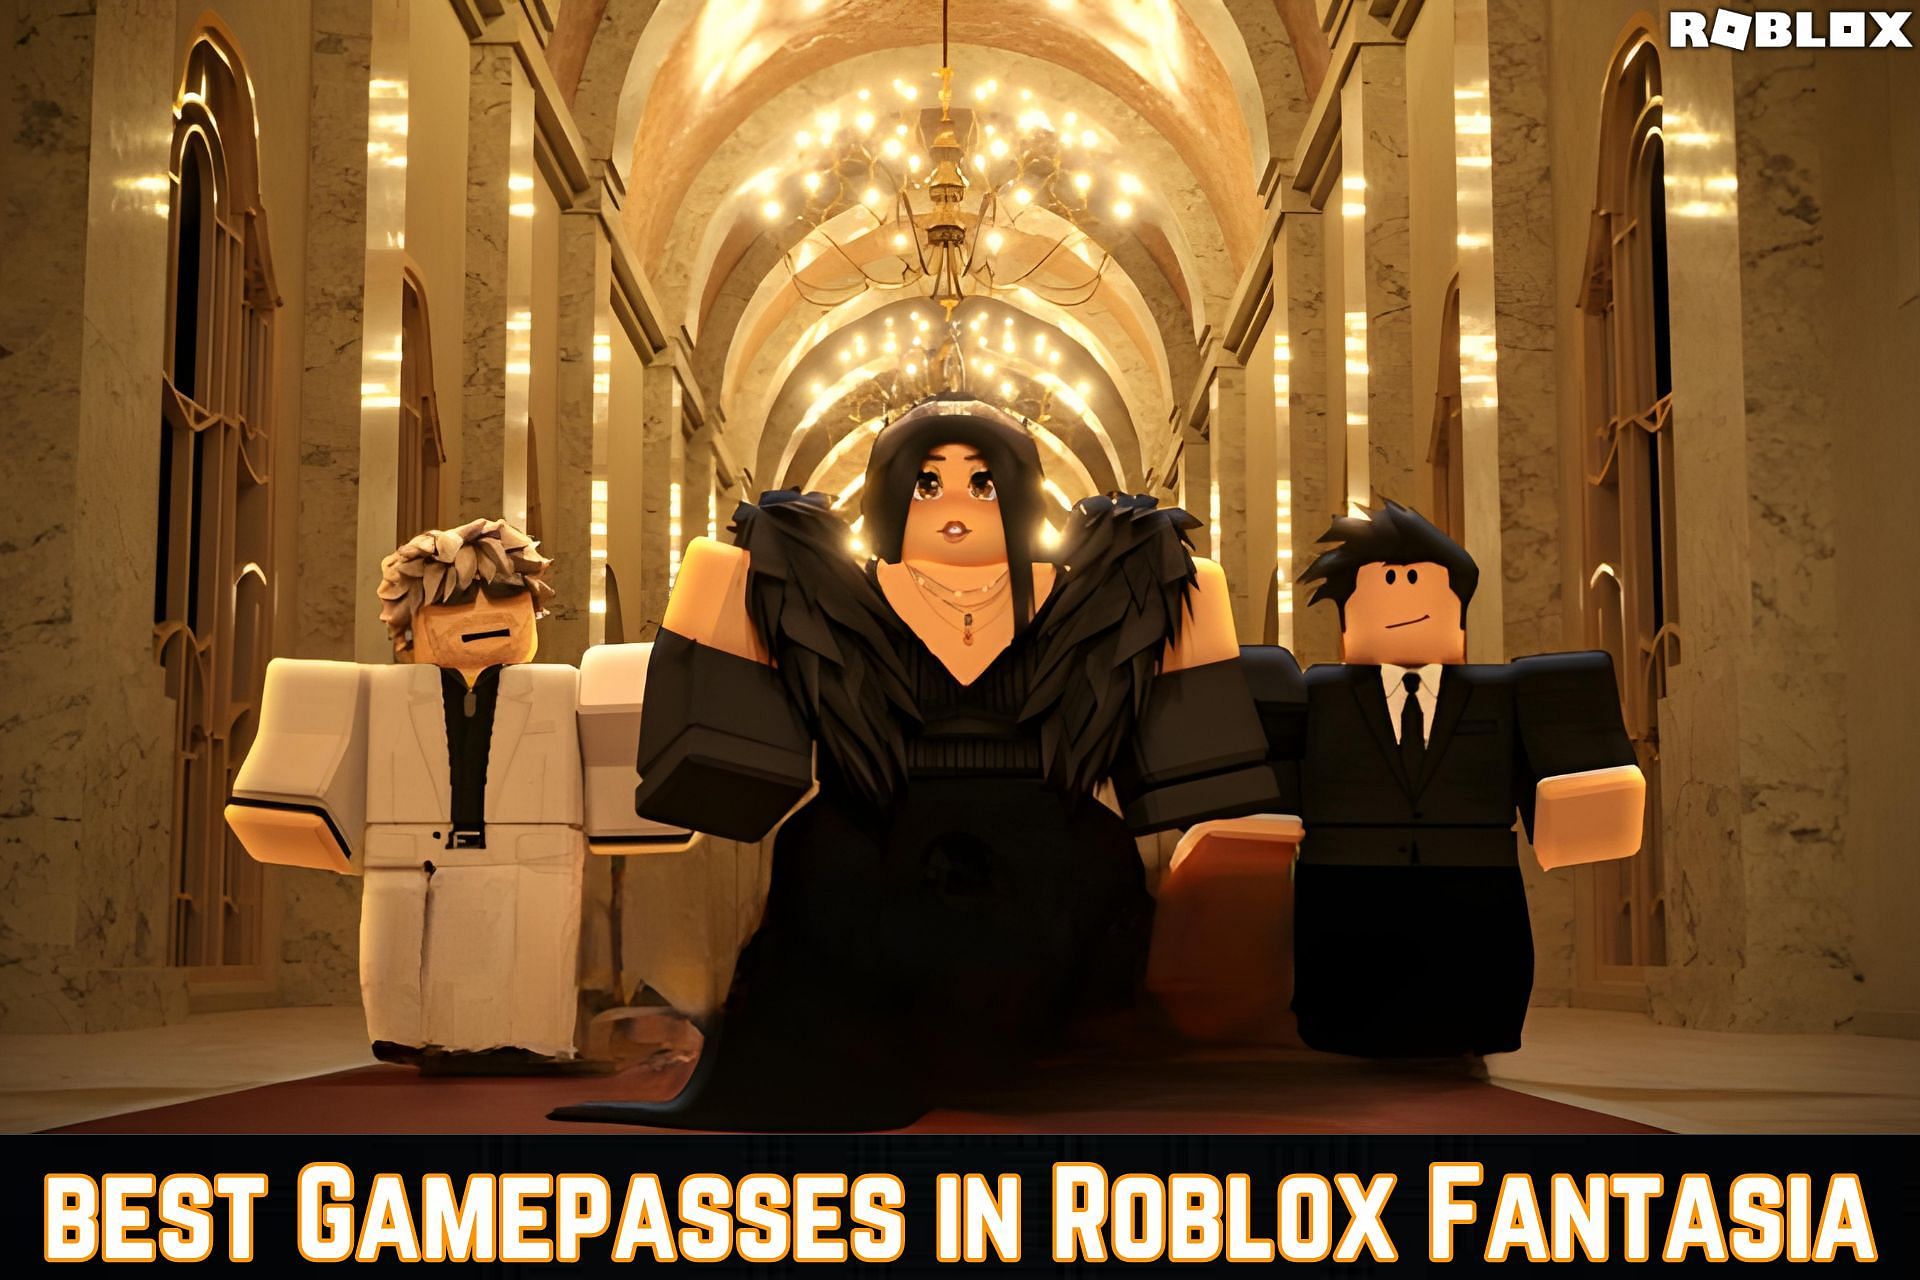 Best gamepasses in the game (Image via Roblox)